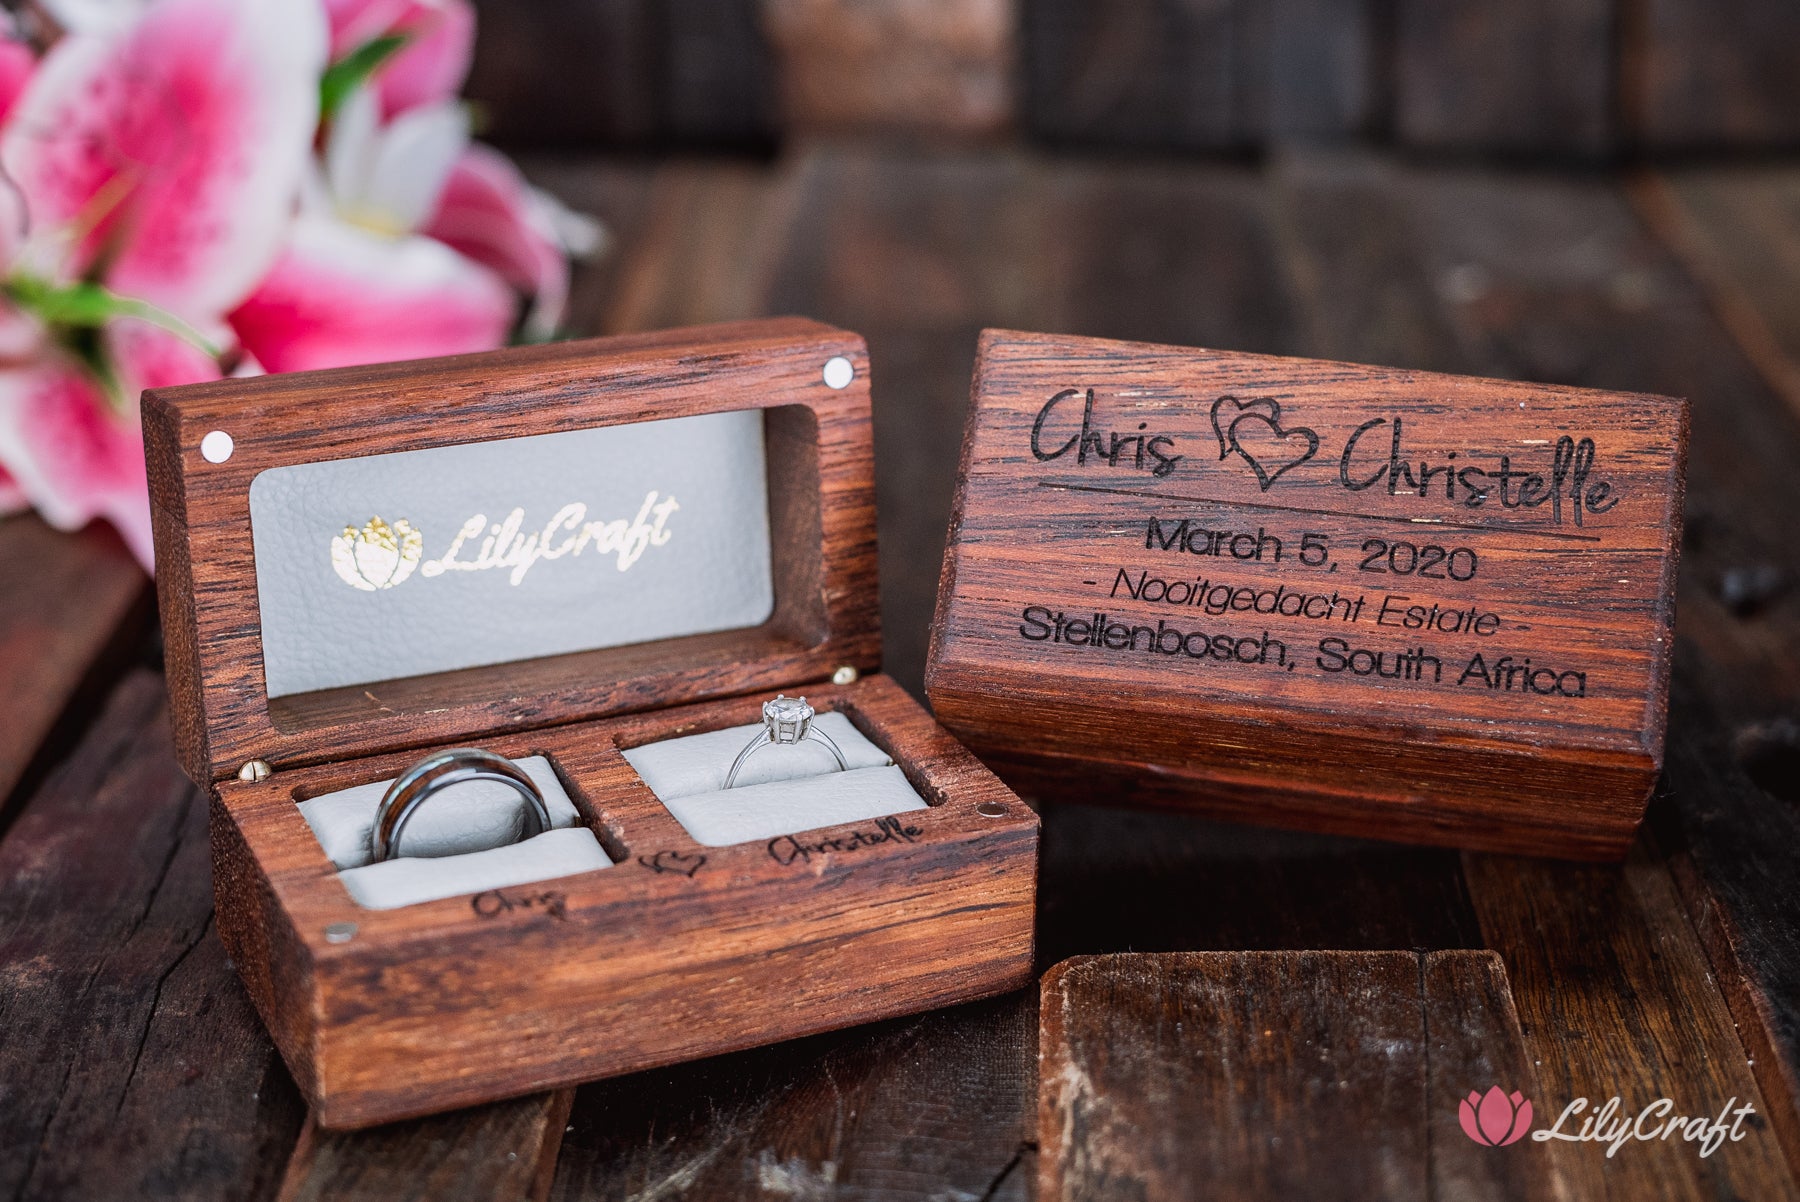 engraved double wedding ring box made of wood and white leather